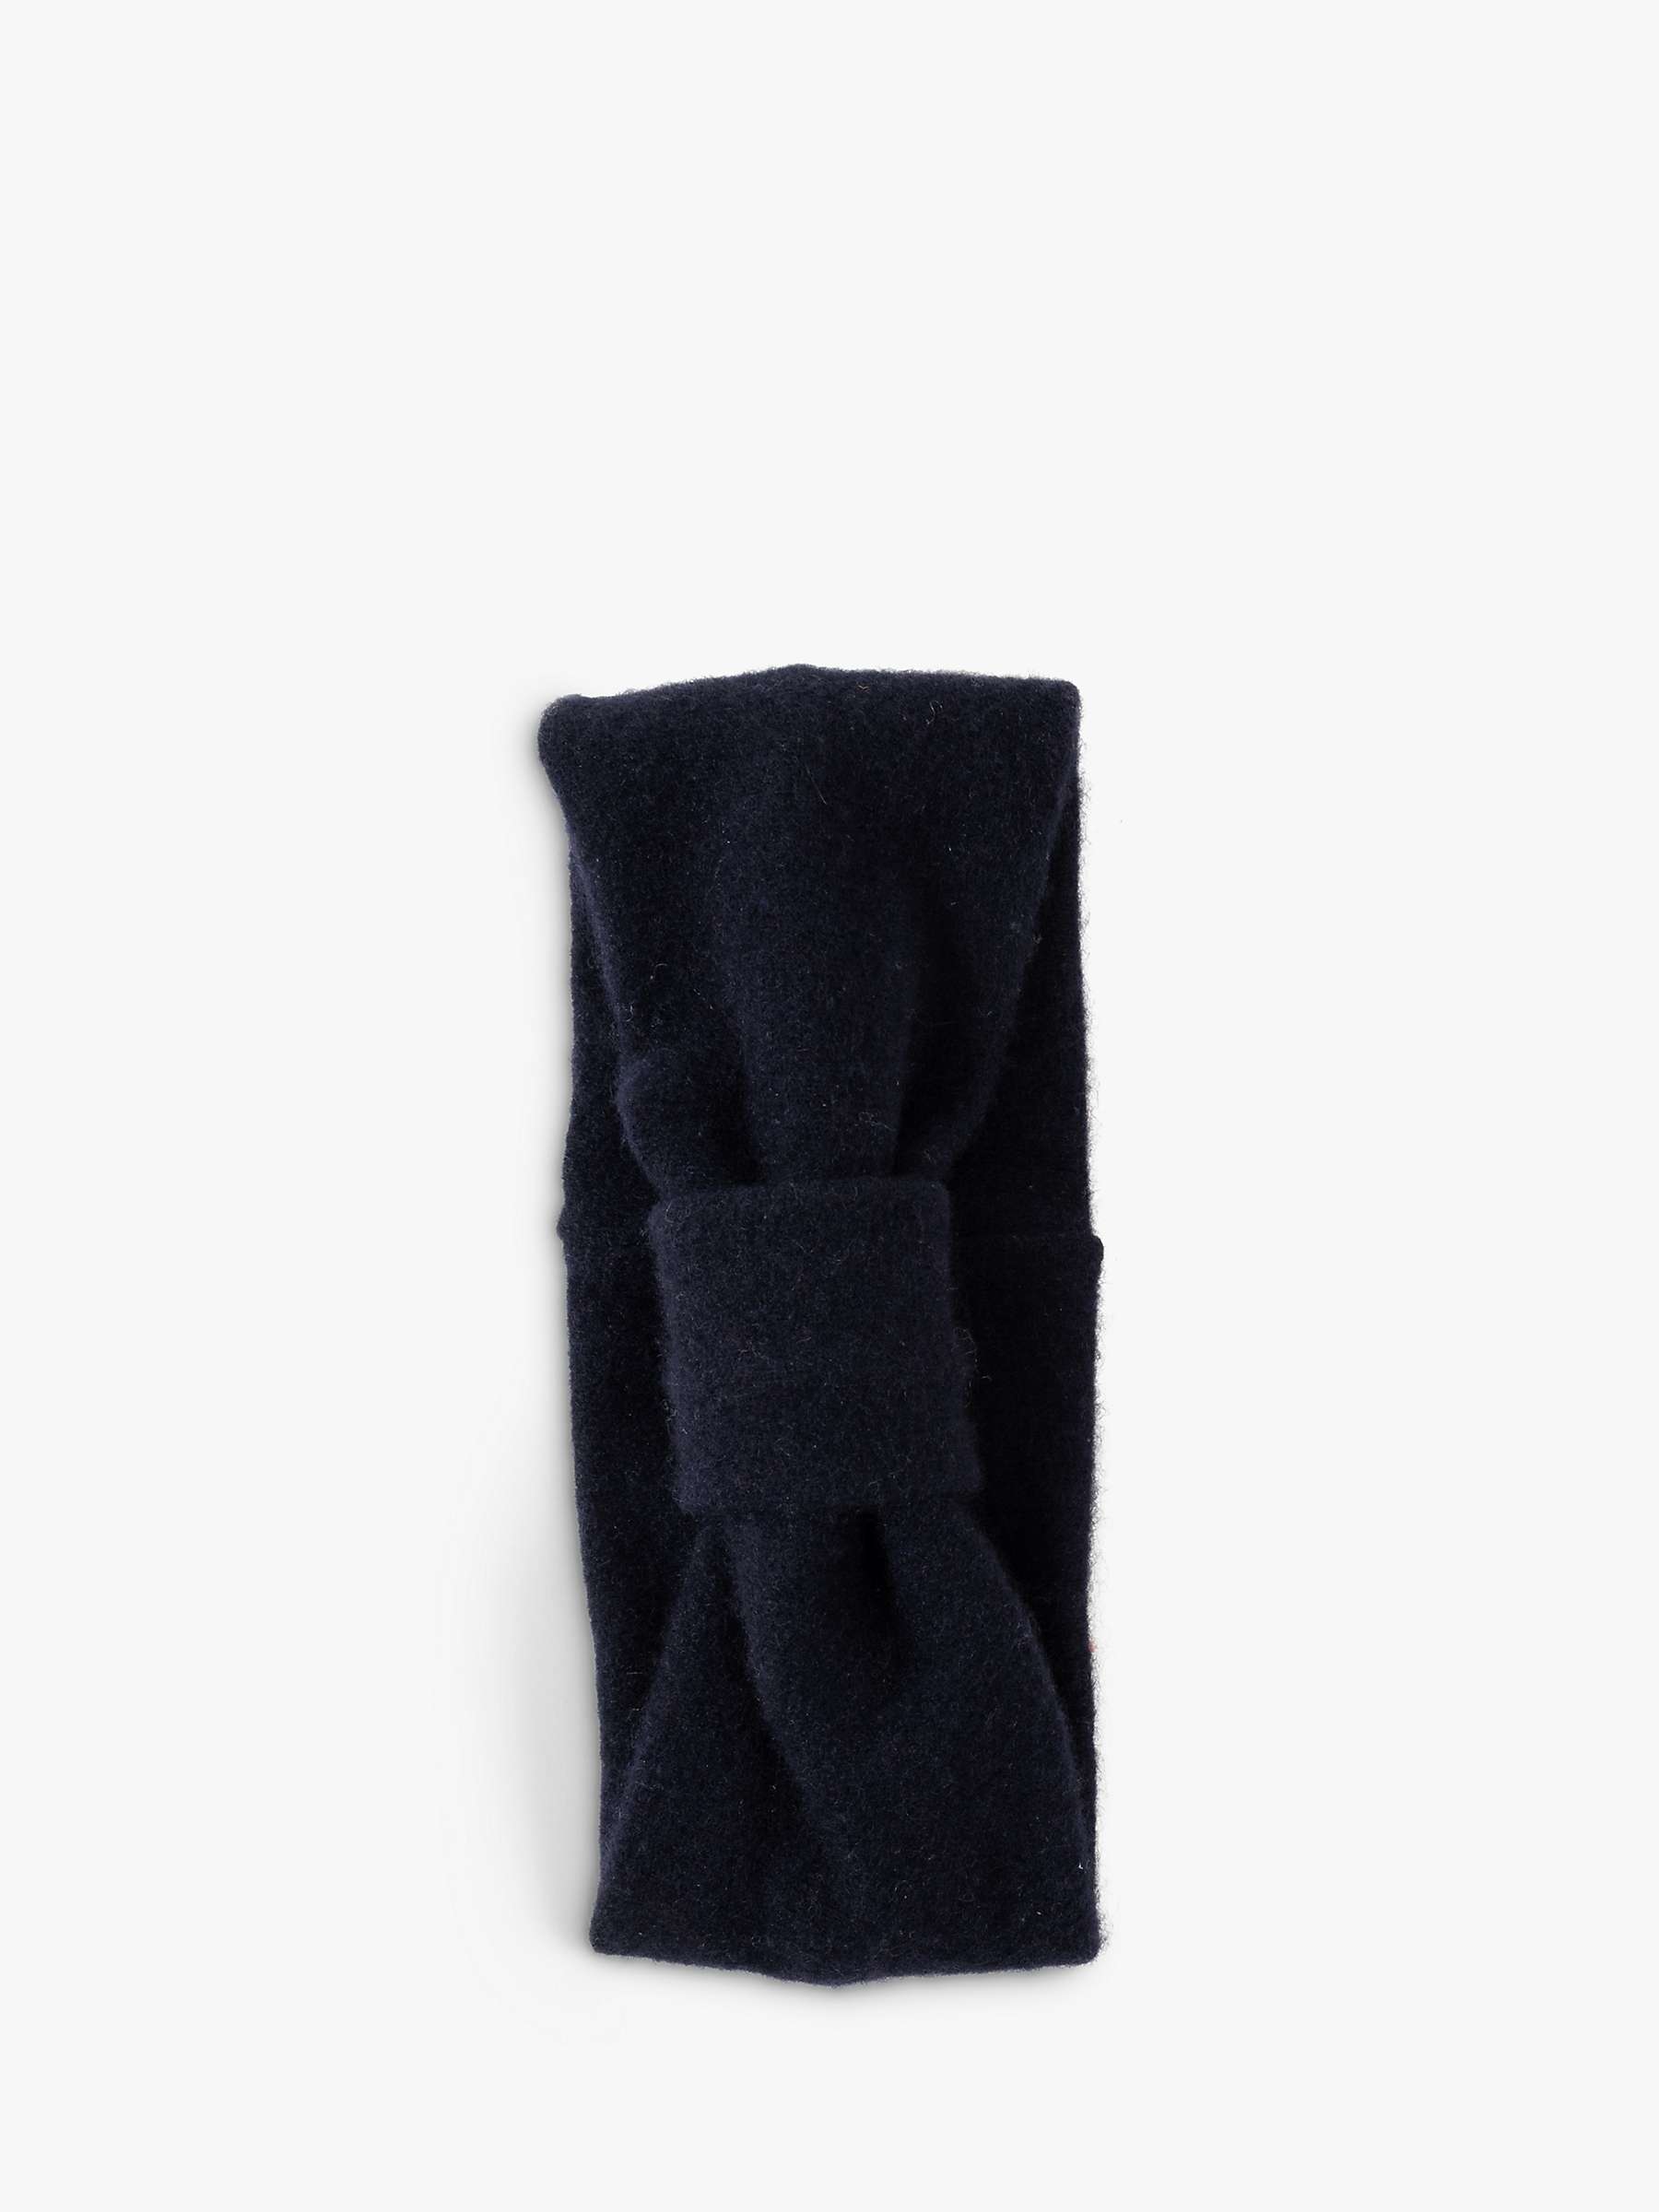 Buy Celtic & Co. x Turtle Doves Recycled Cashmere Headband Online at johnlewis.com